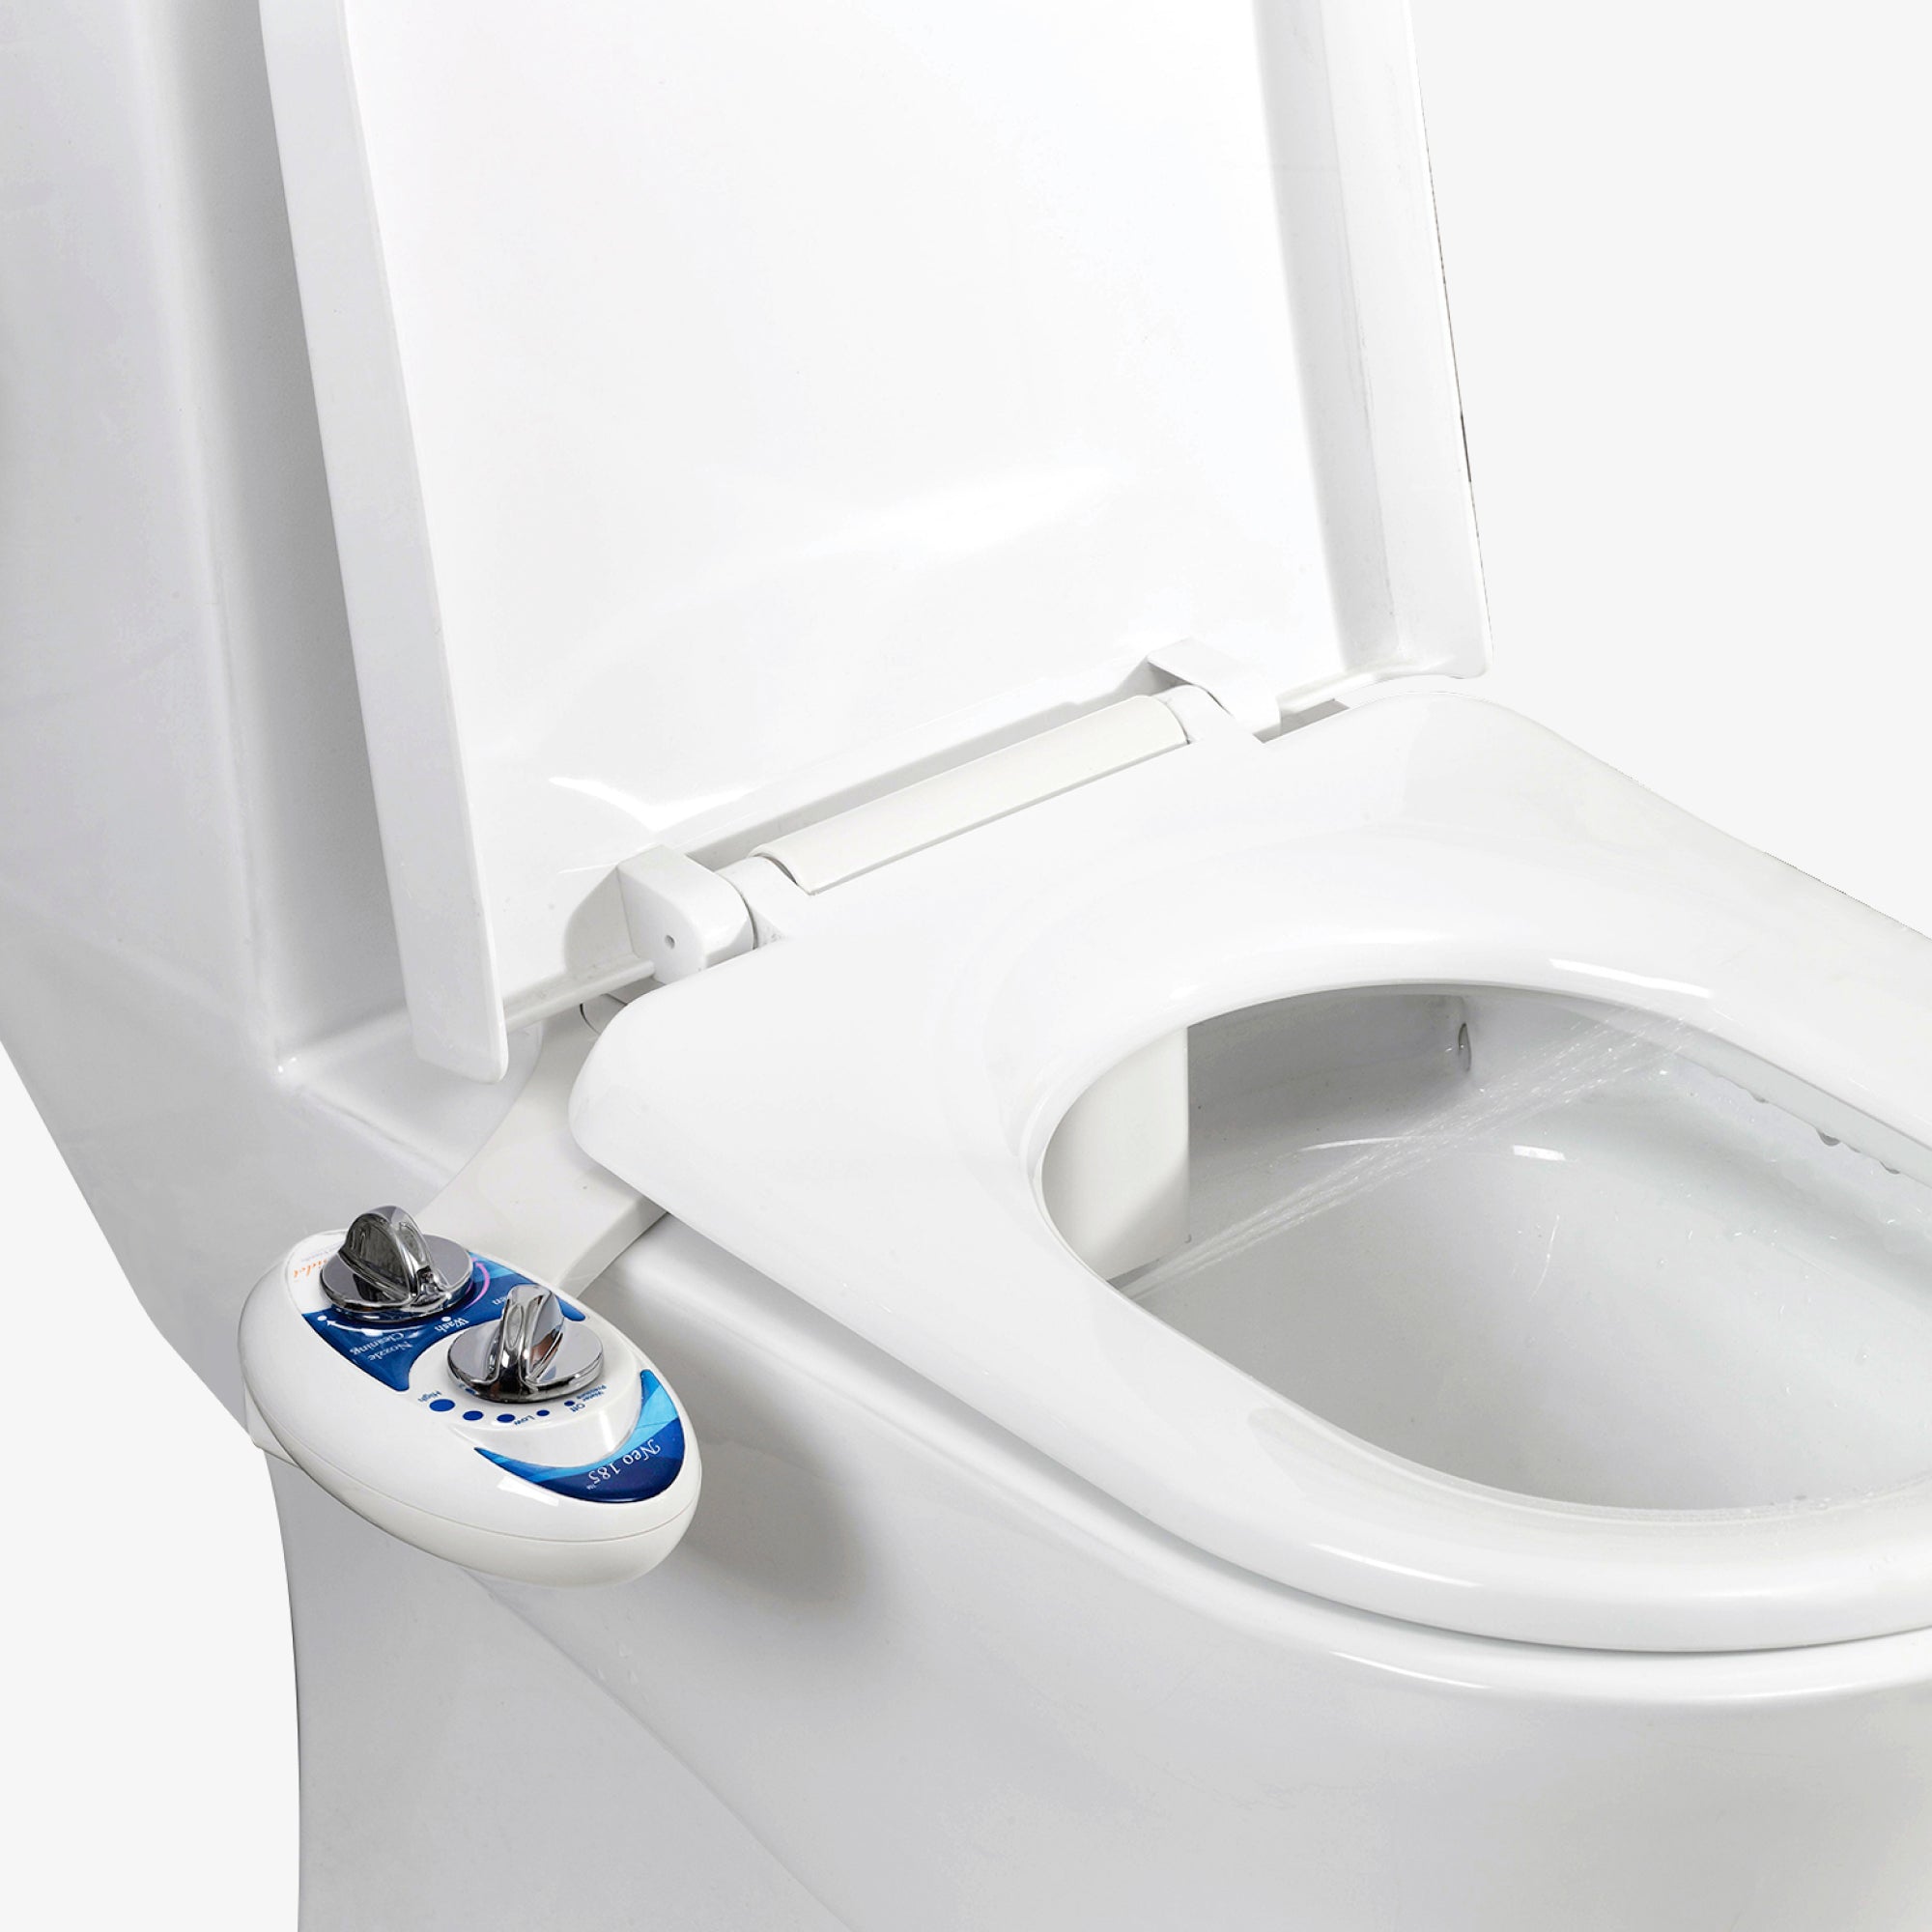 NEO 185: Imperfect Packaging - NEO 185 Blue installed on a toilet with water spraying from nozzles